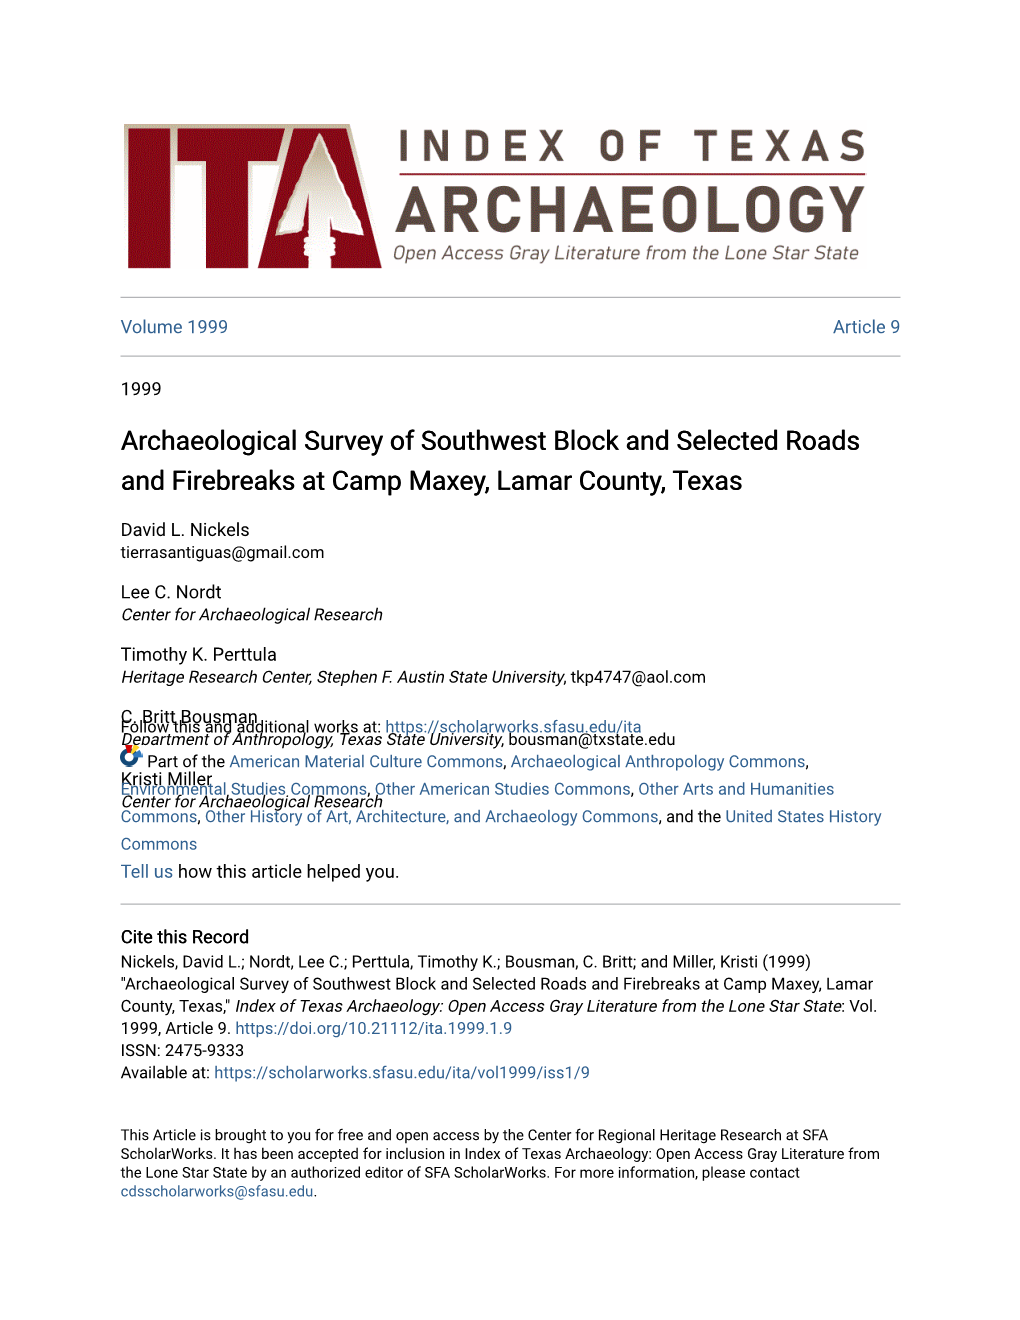 Archaeological Survey of Southwest Block and Selected Roads and Firebreaks at Camp Maxey, Lamar County, Texas